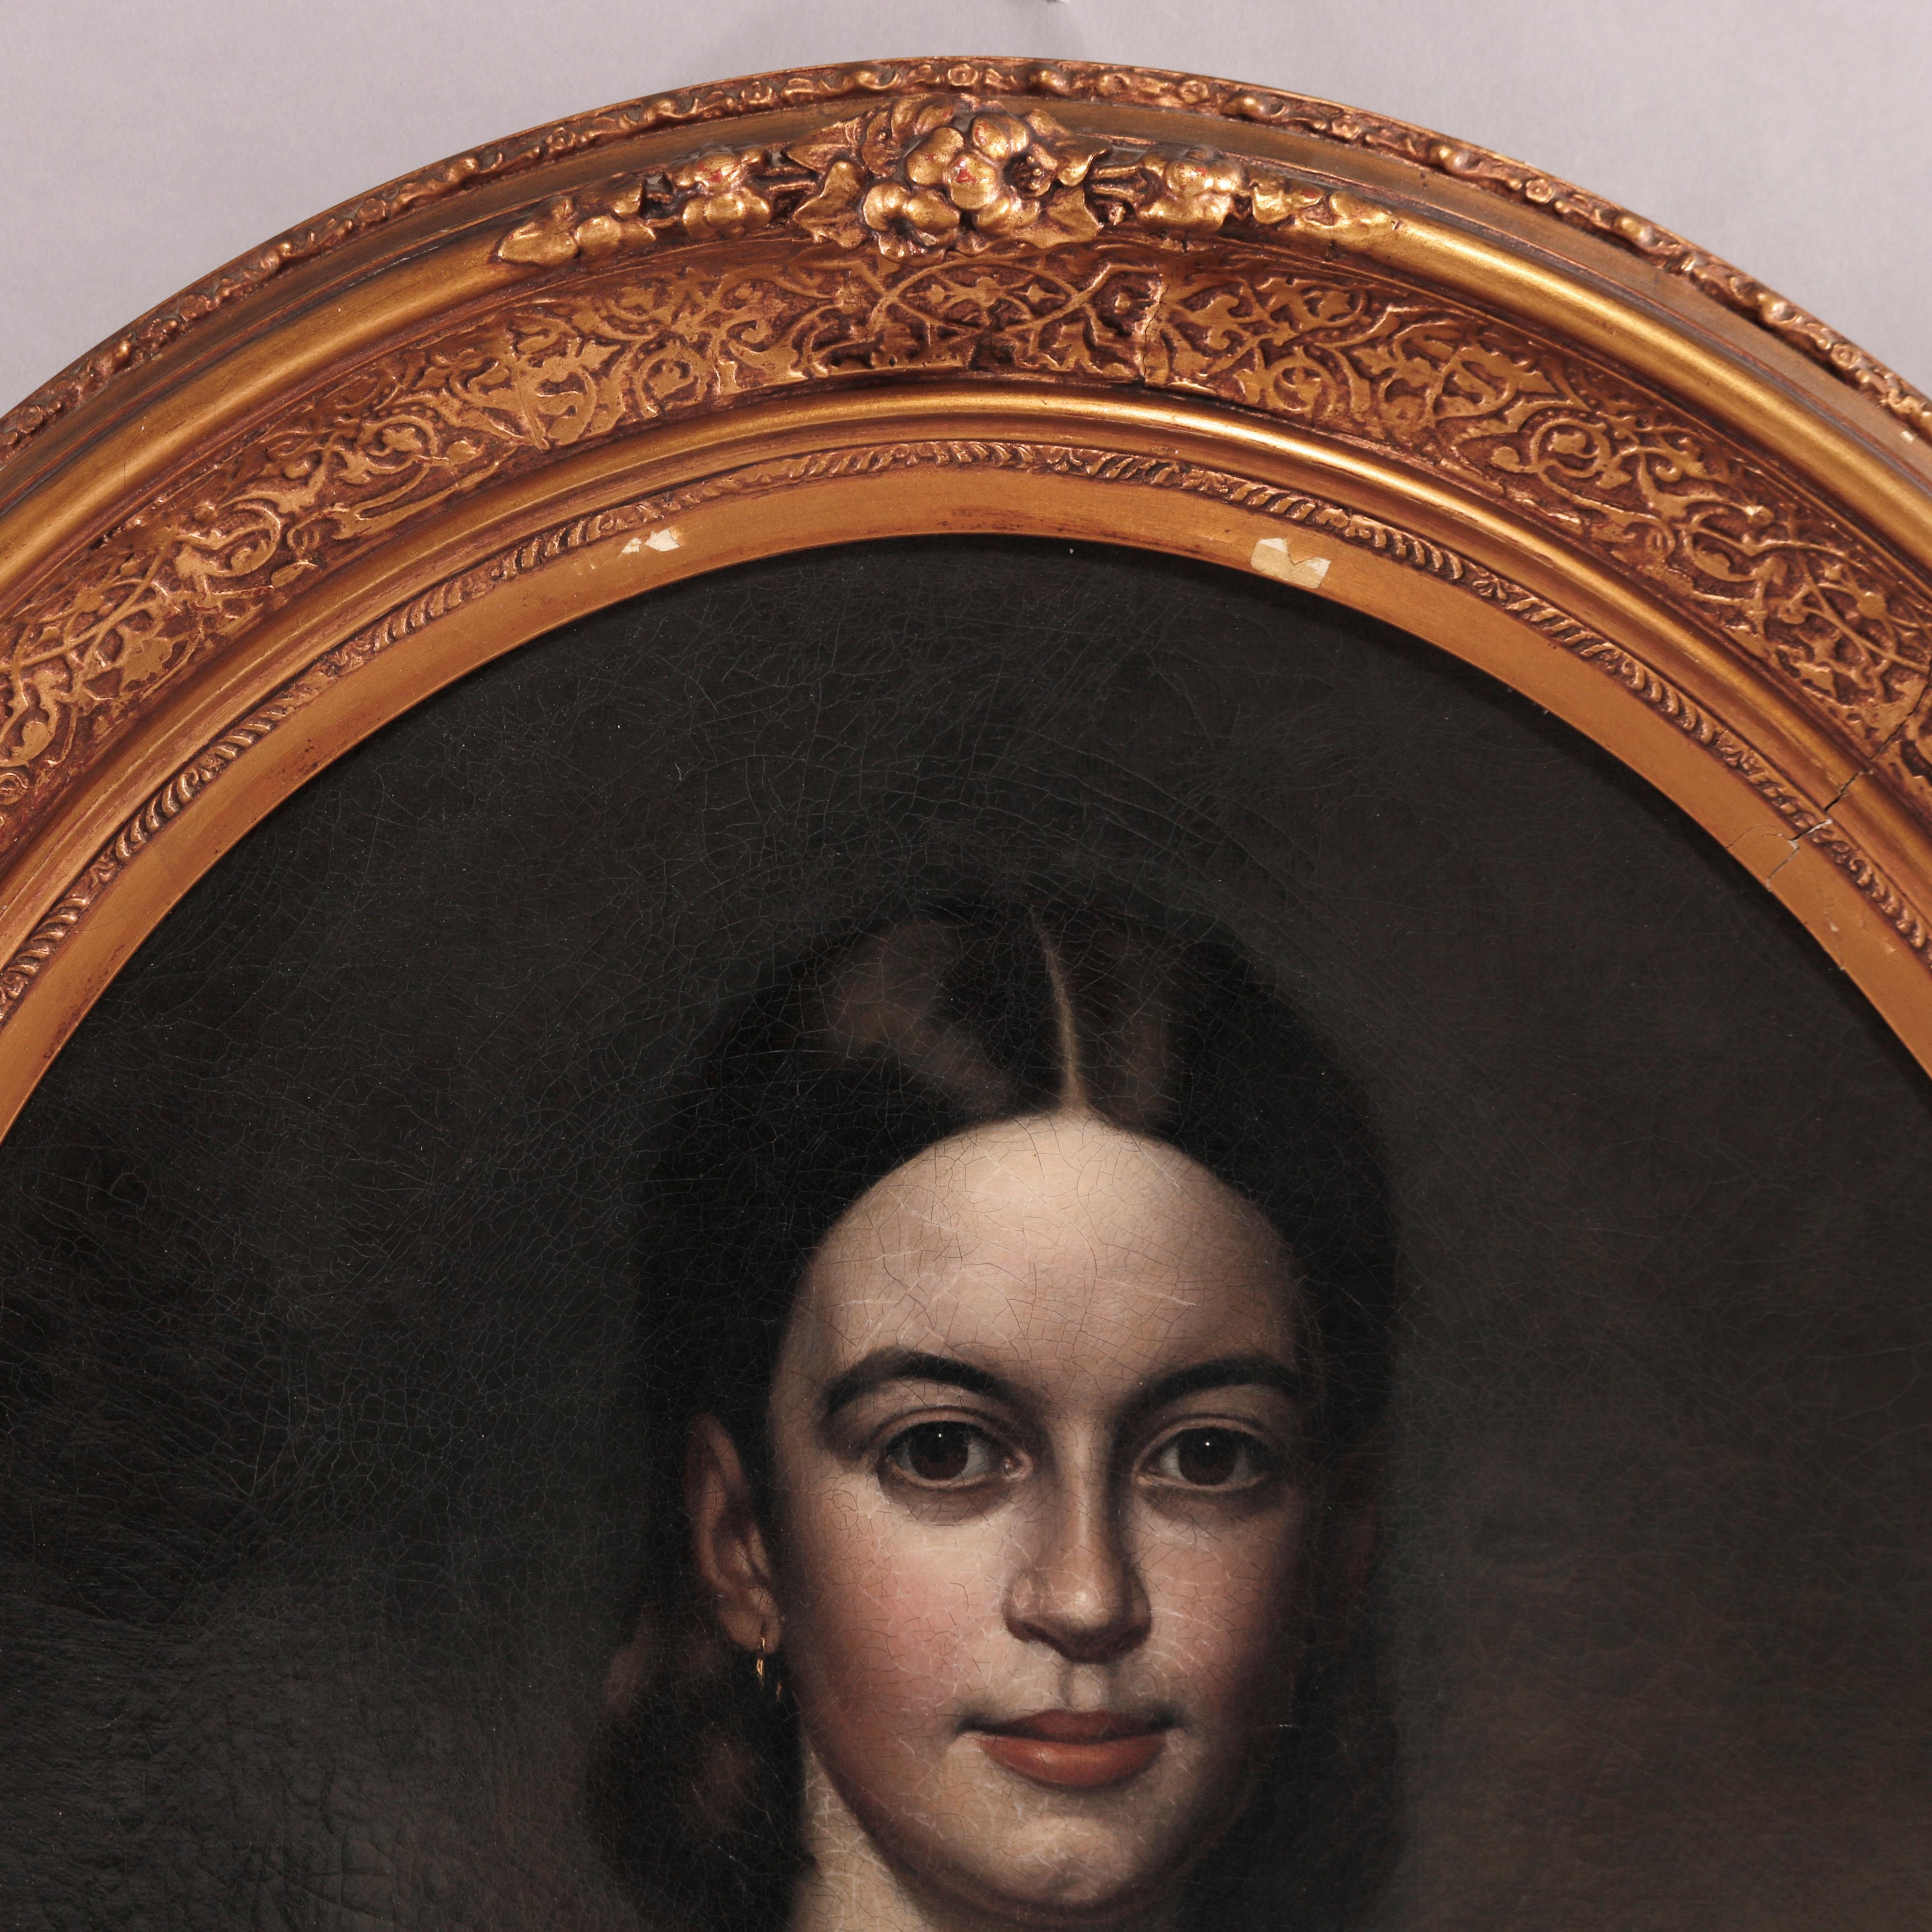 Neoclassical Antique Portrait Painting of a Young Woman by JA Haskell 1860 